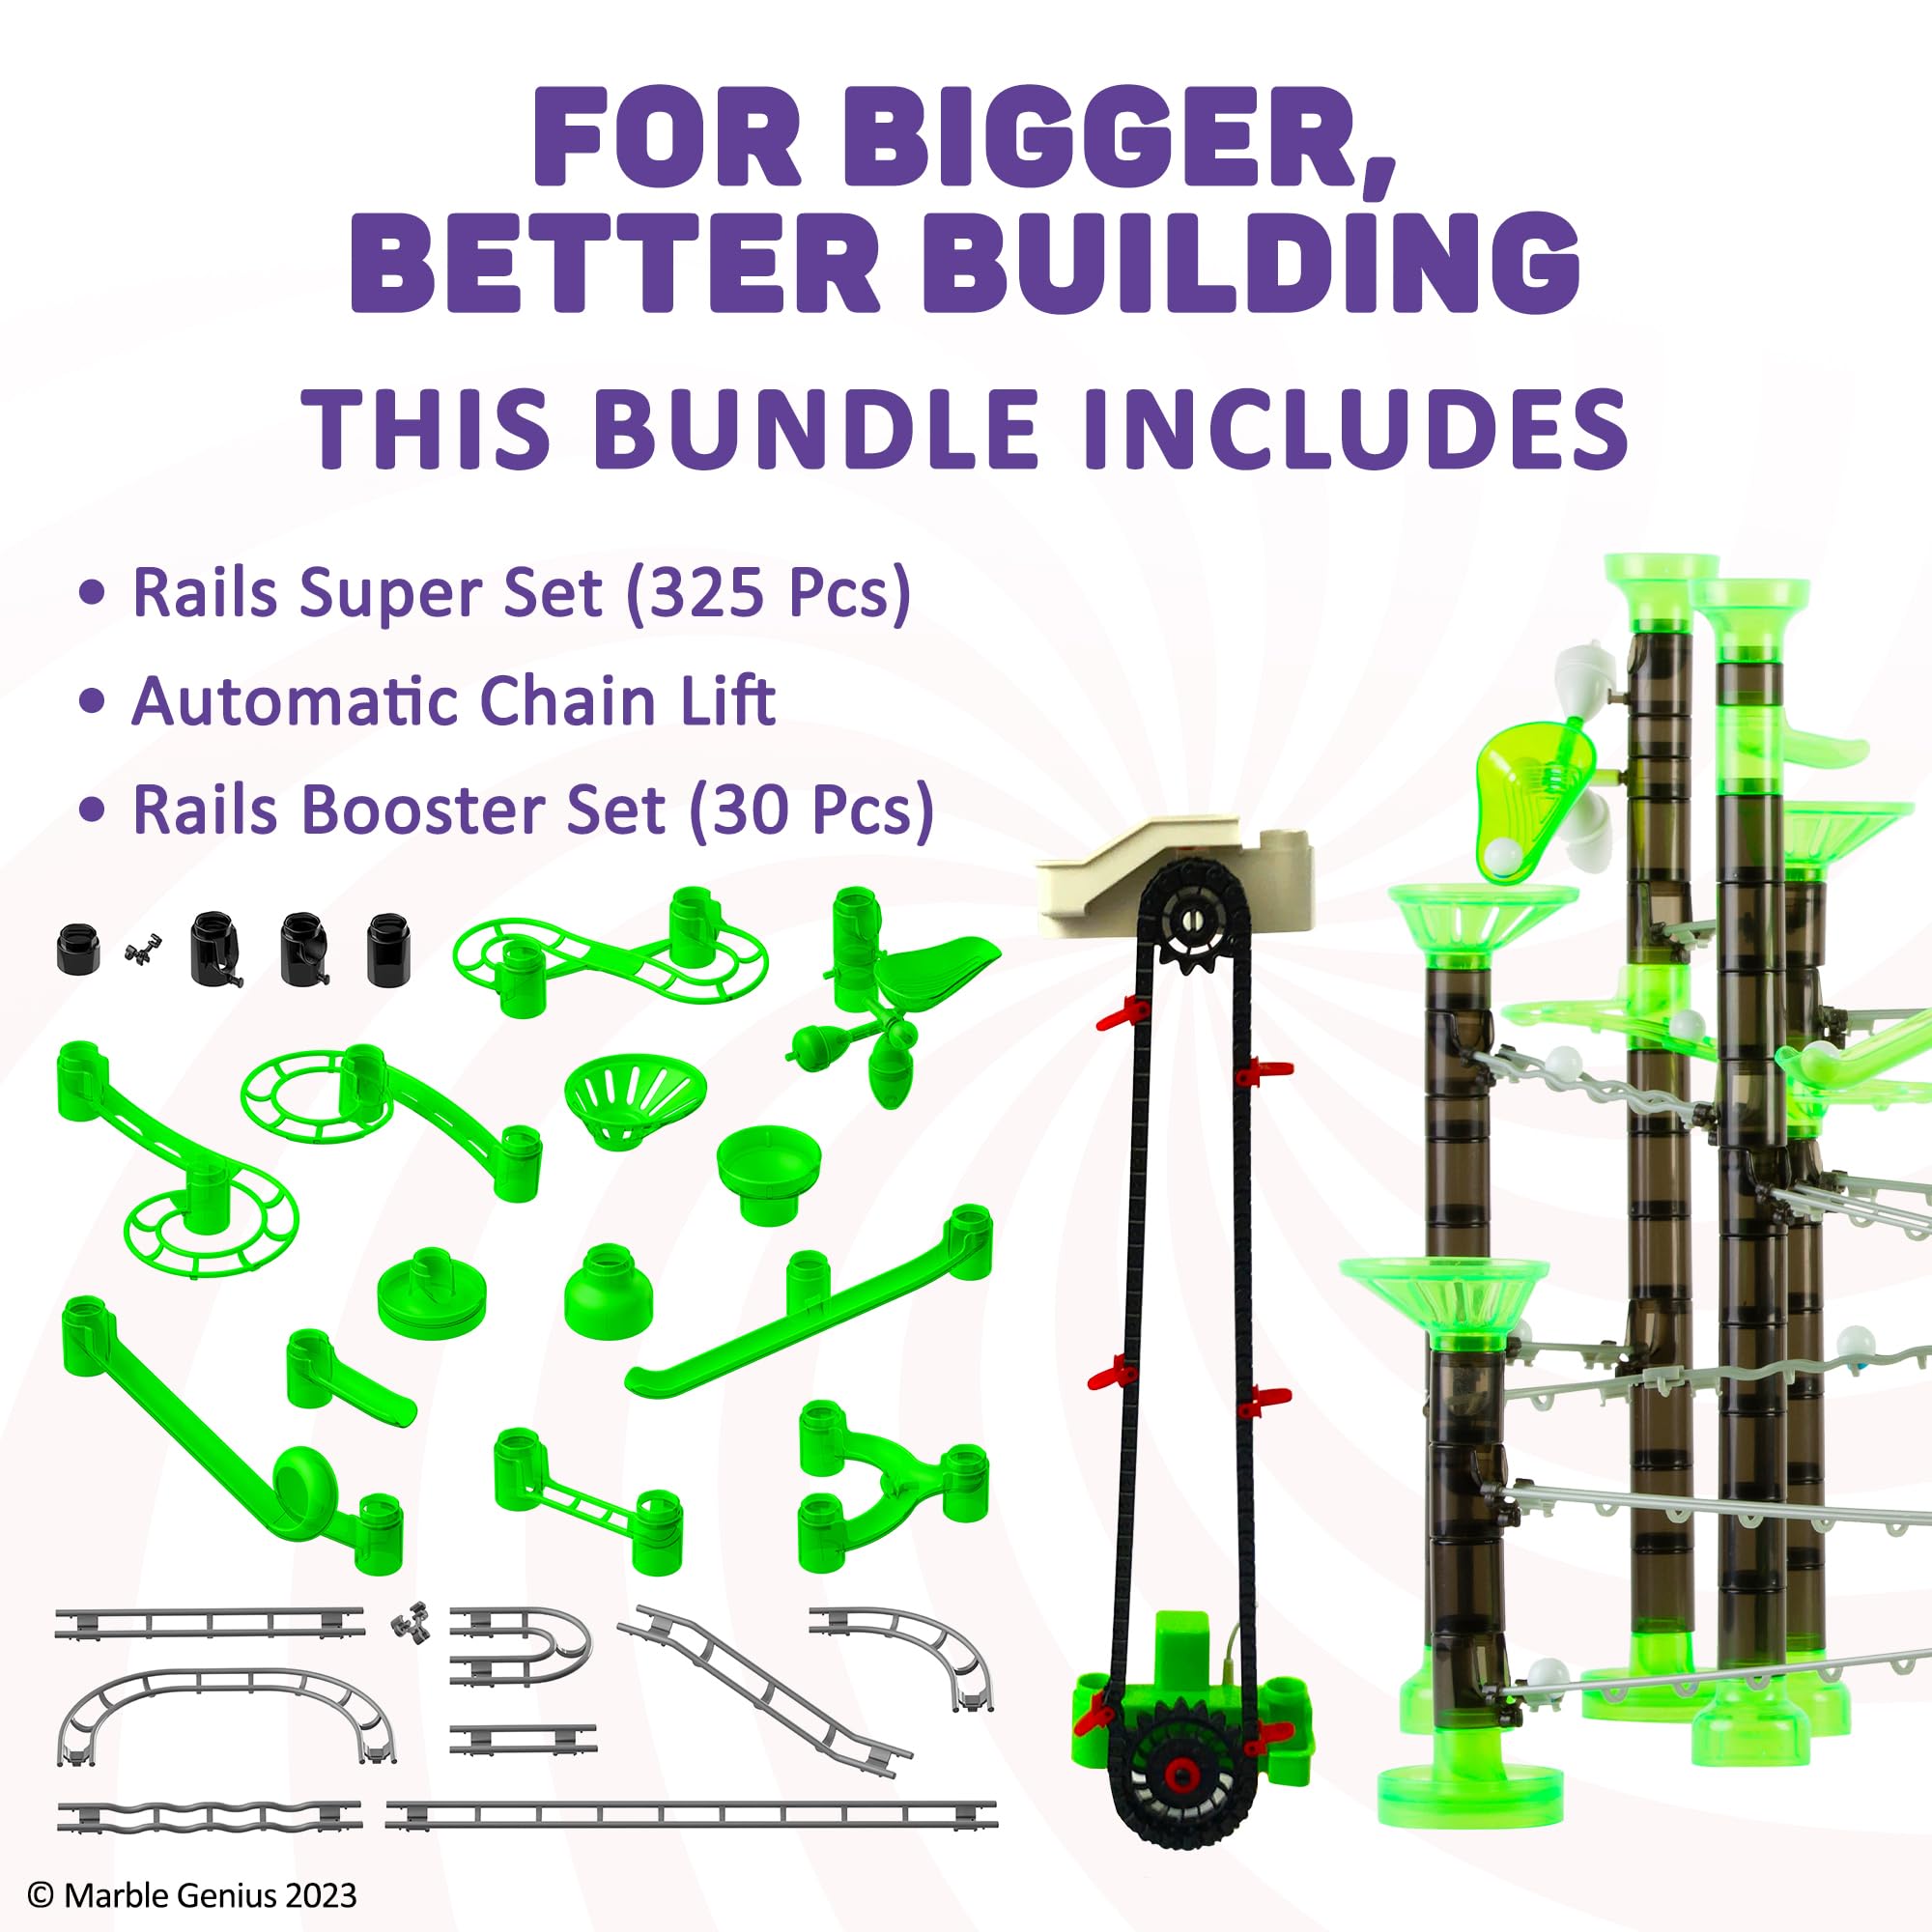 Marble Genius Bundle: Marble Rails Super Set (325 Pieces), Automatic Chain Lift, Marble Rails Booster Set (30 Pieces), Endless Fun, and Creativity, Experience The Thrills of Marble Racing